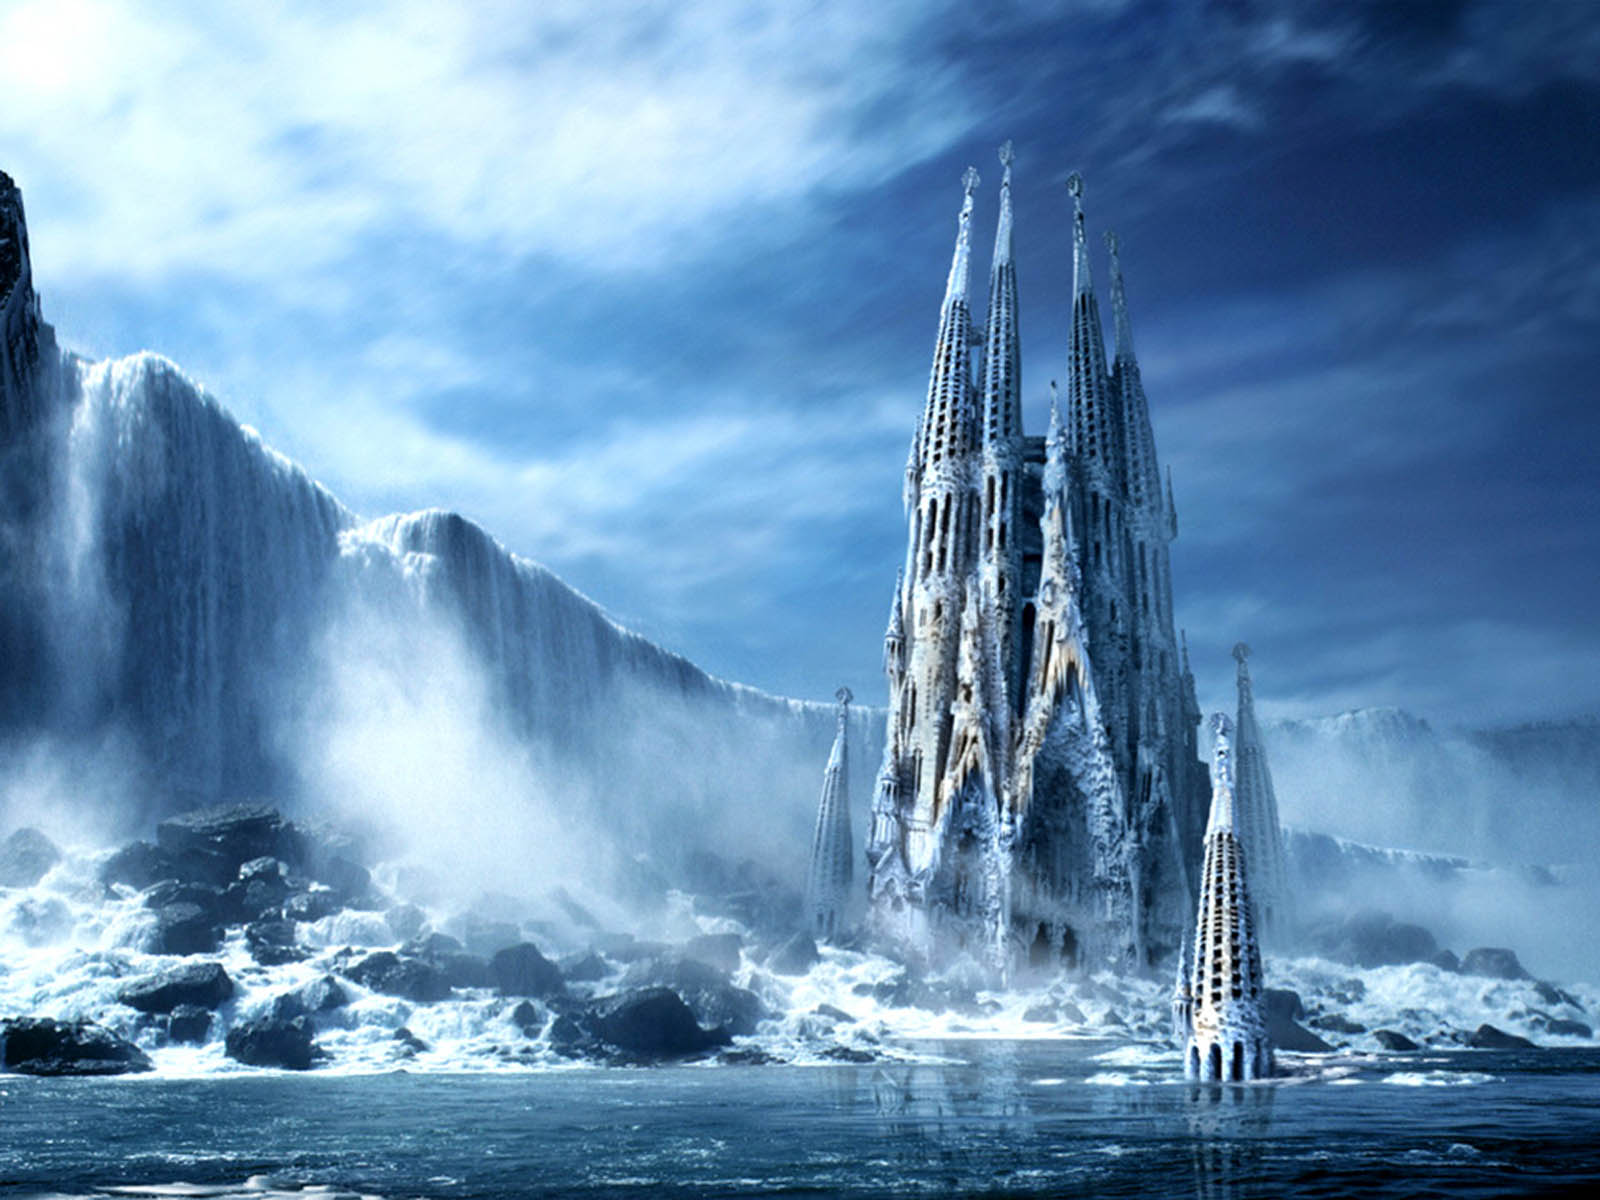 Tag 3d Castle Wallpaper Background Photos Pictures And Image For